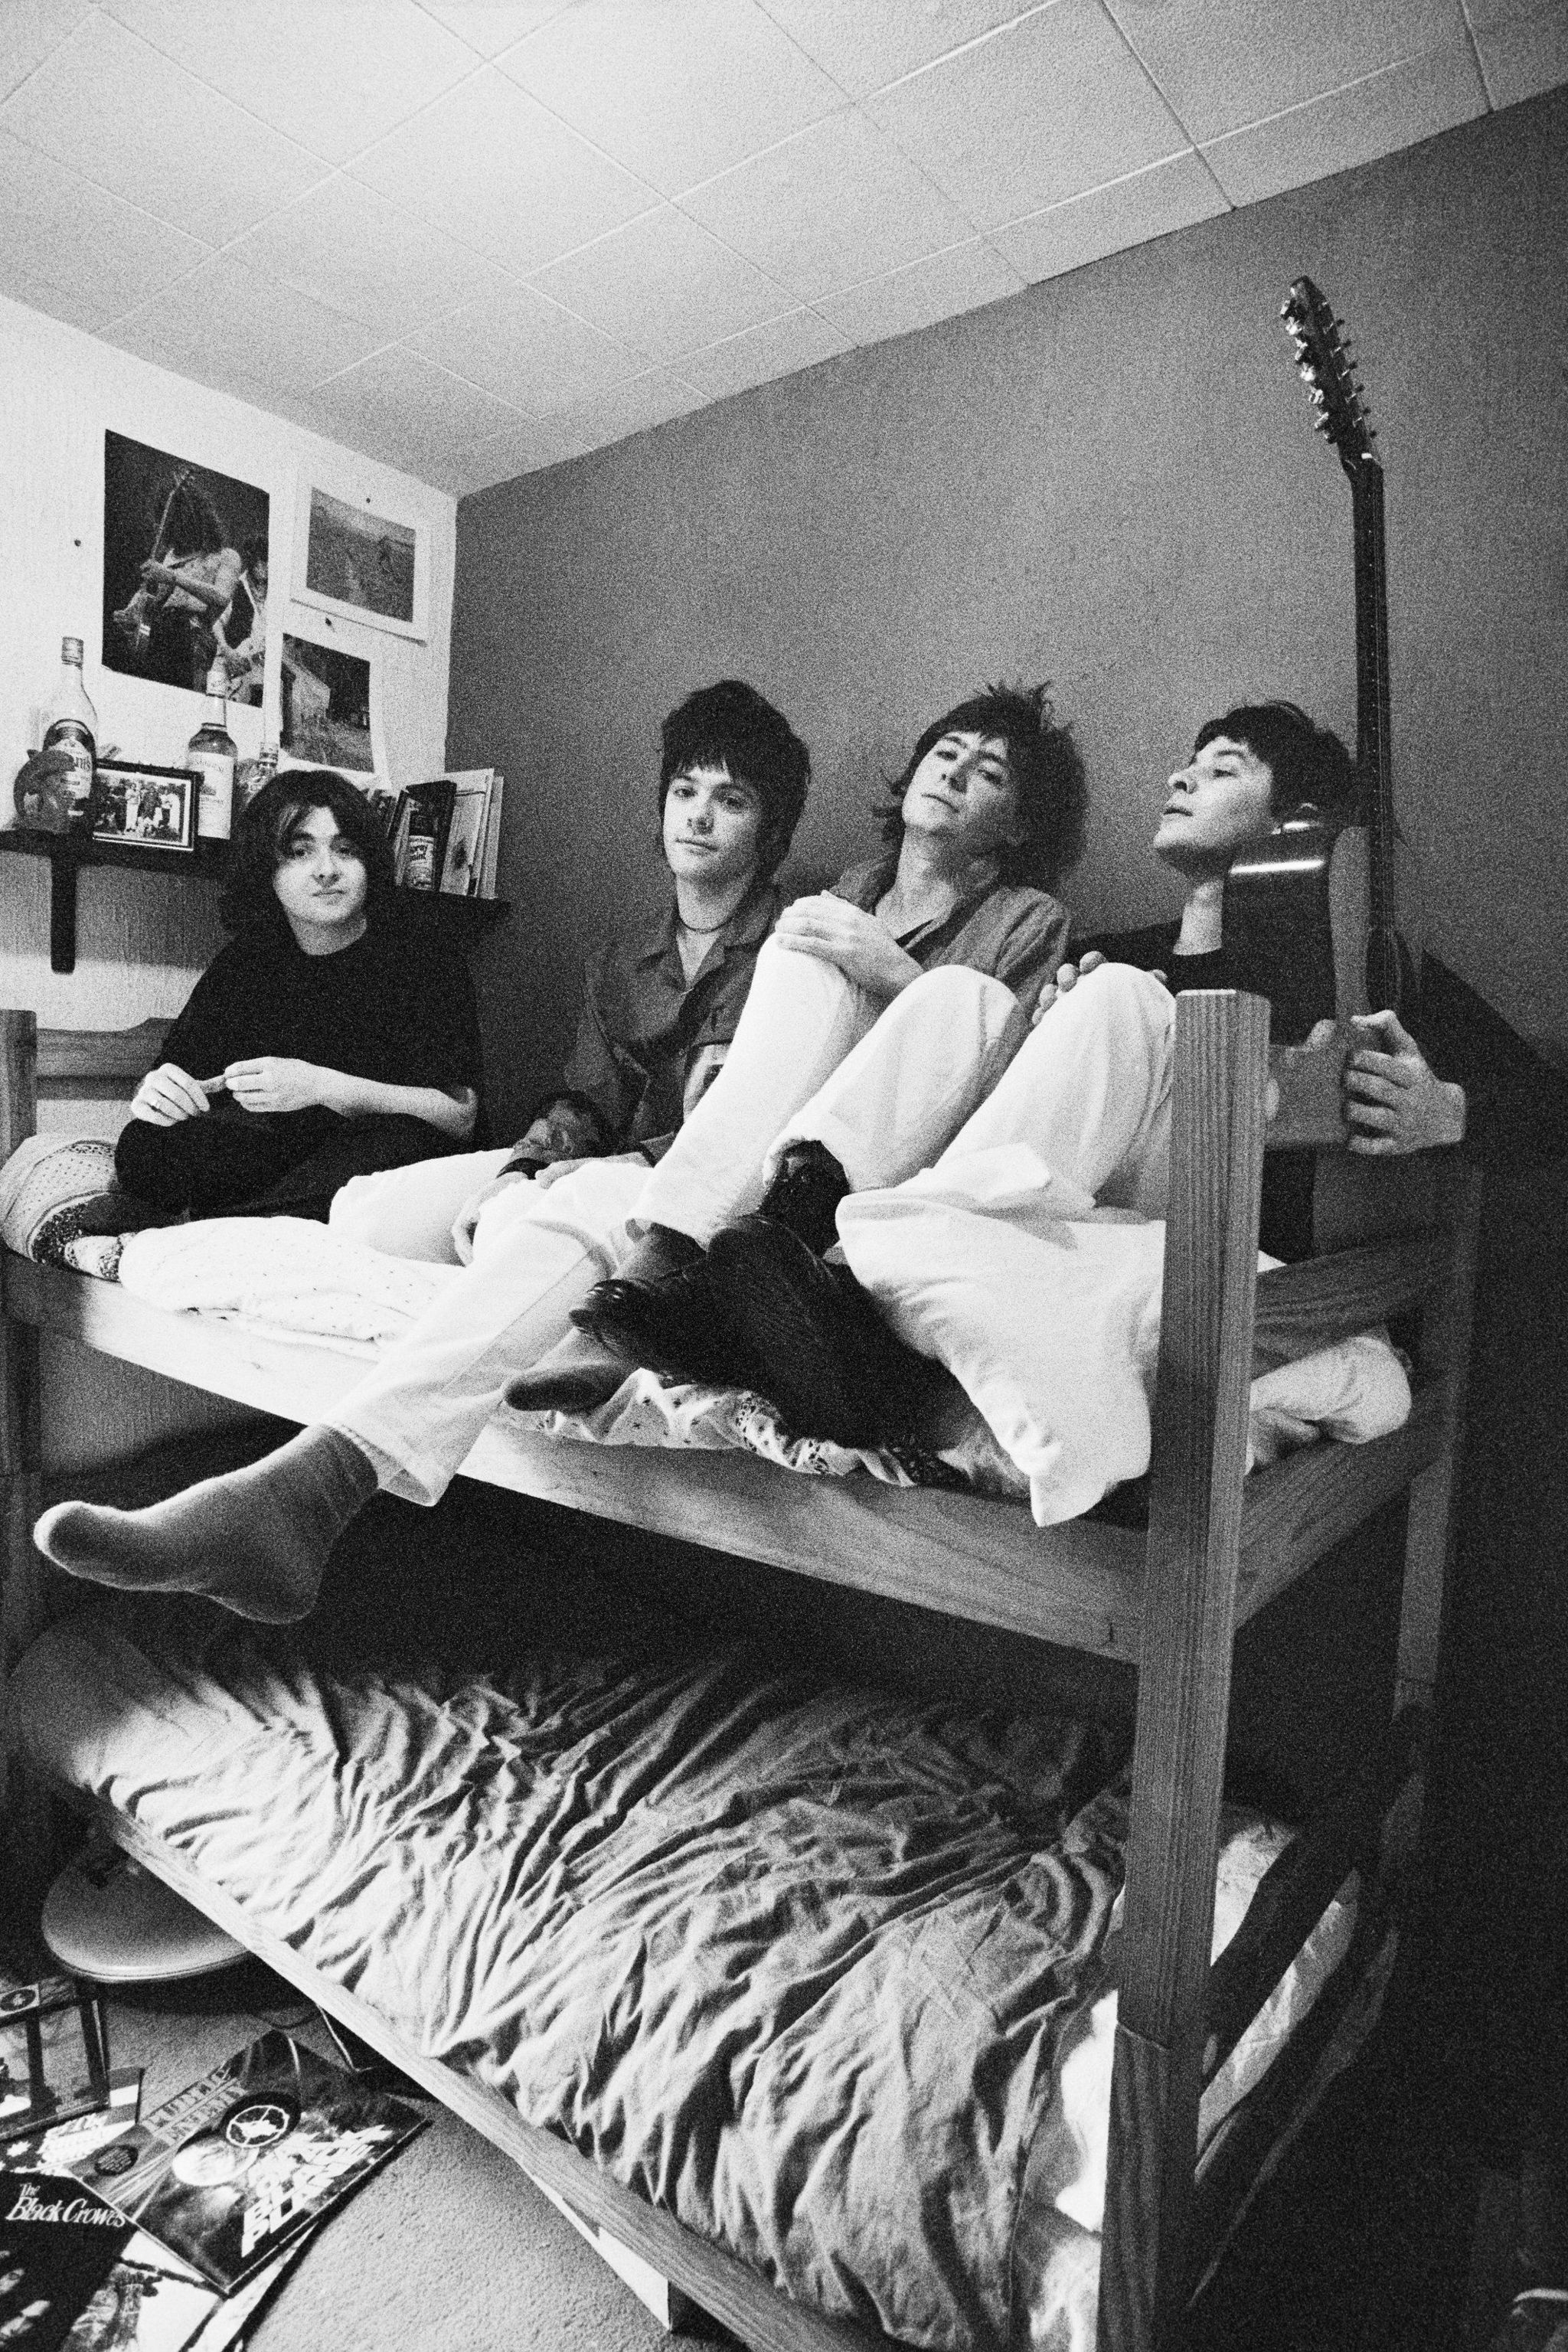 Manic Street Preachers on a bunk bed together in the early 1990s